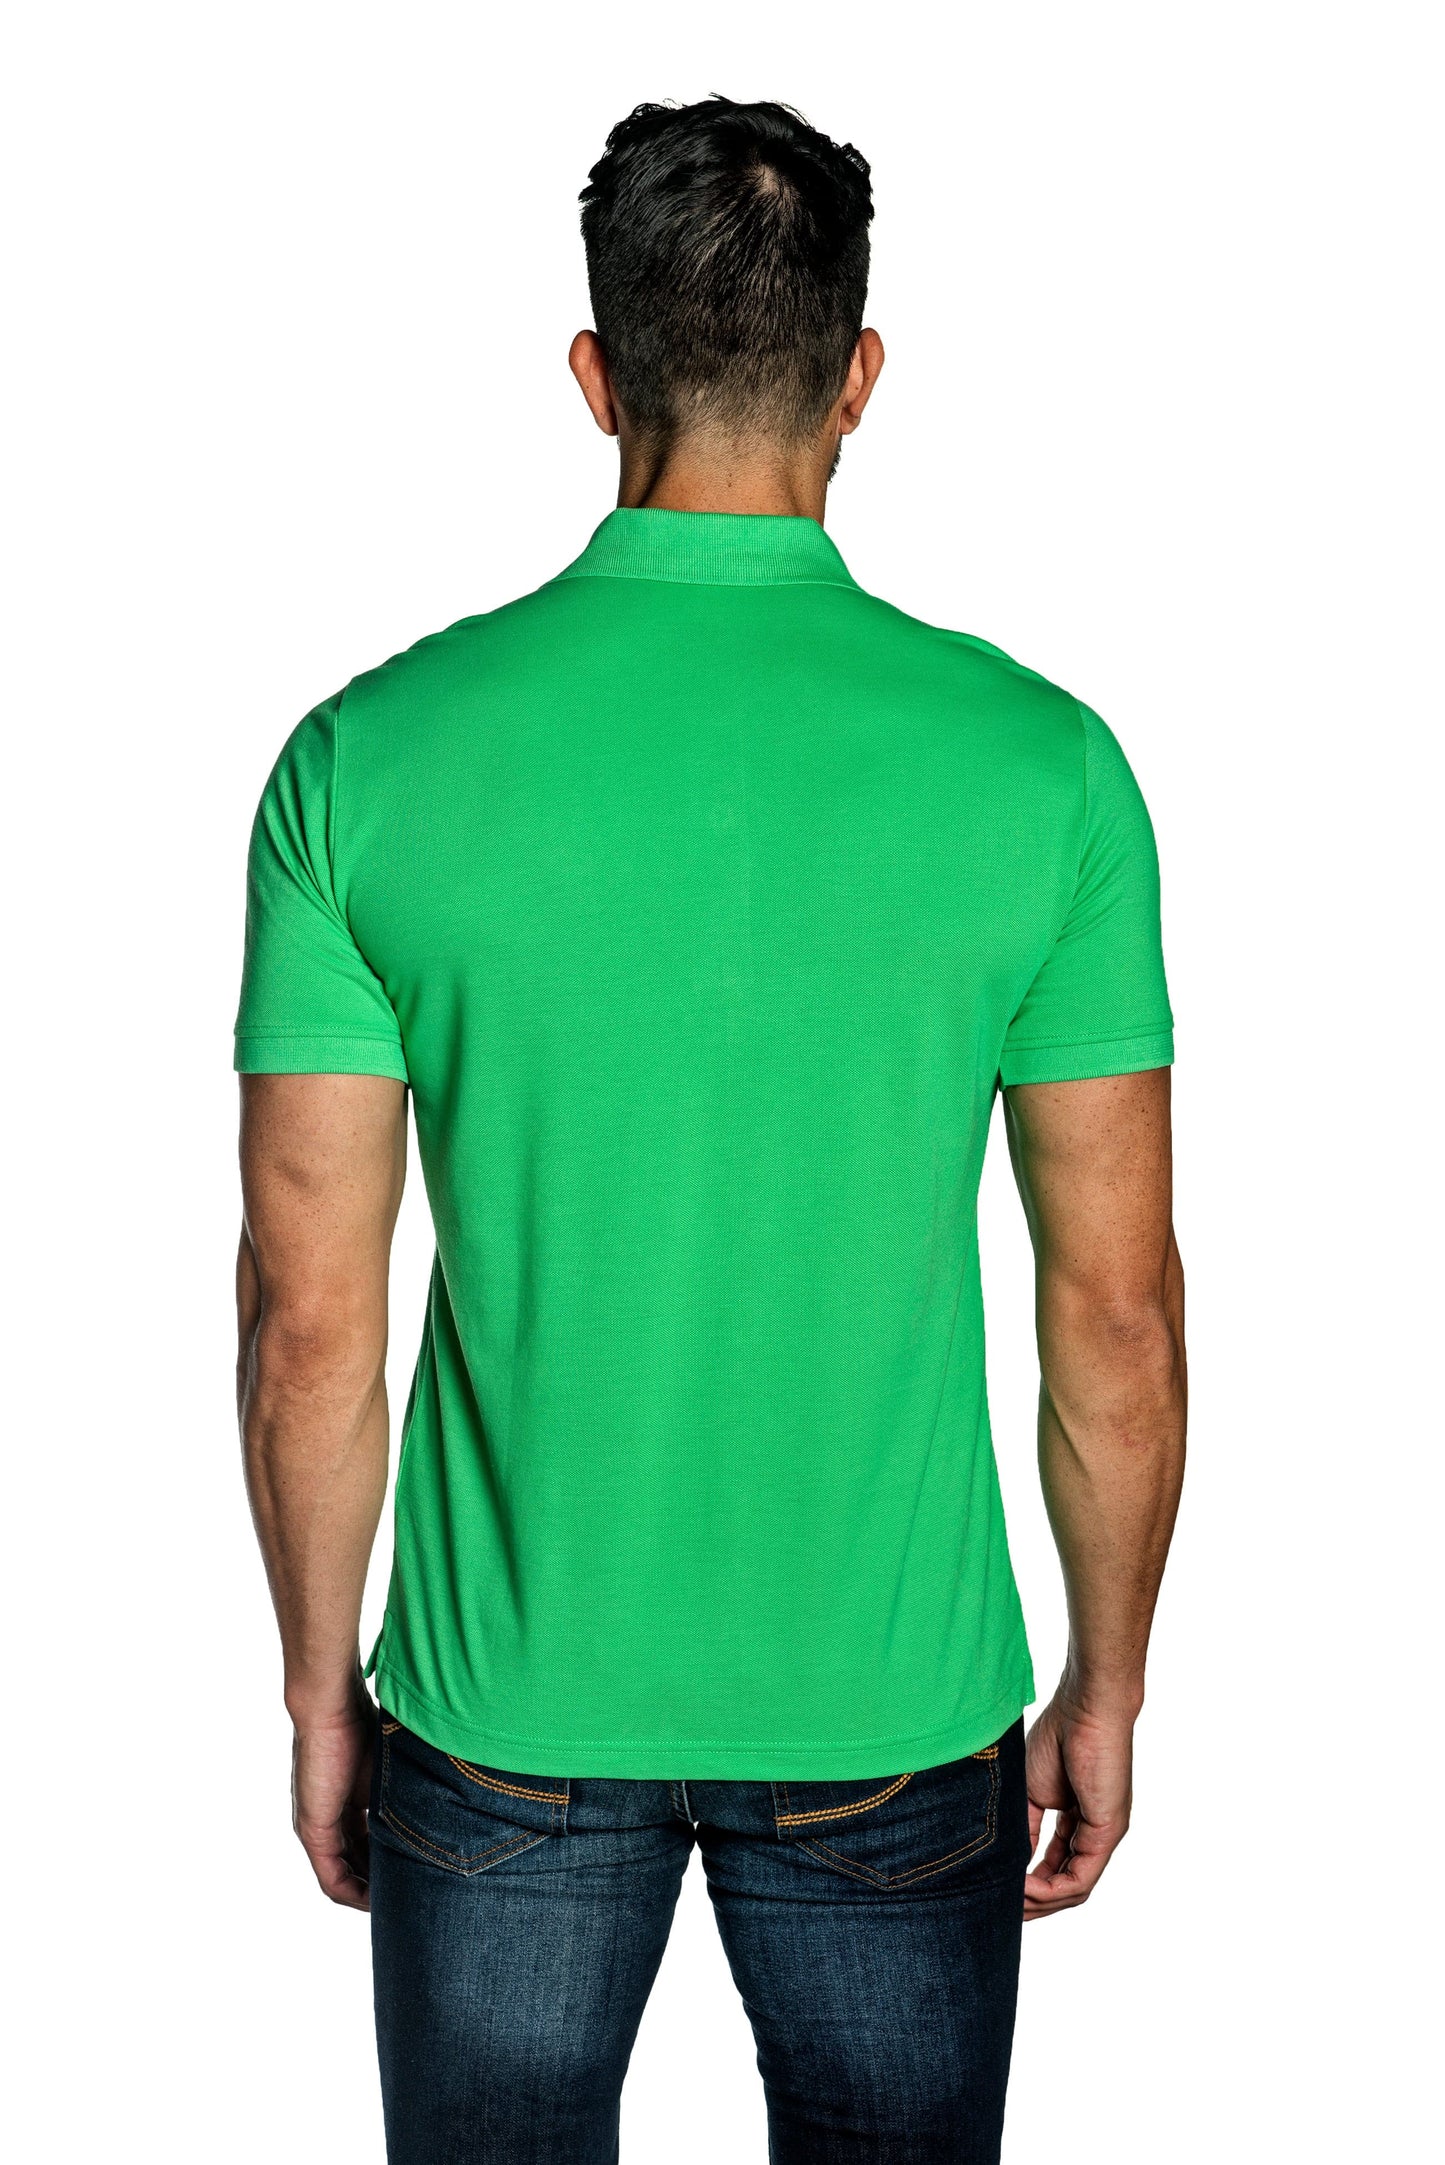 Green Mens Polo With Lightning Embroidery P-33.